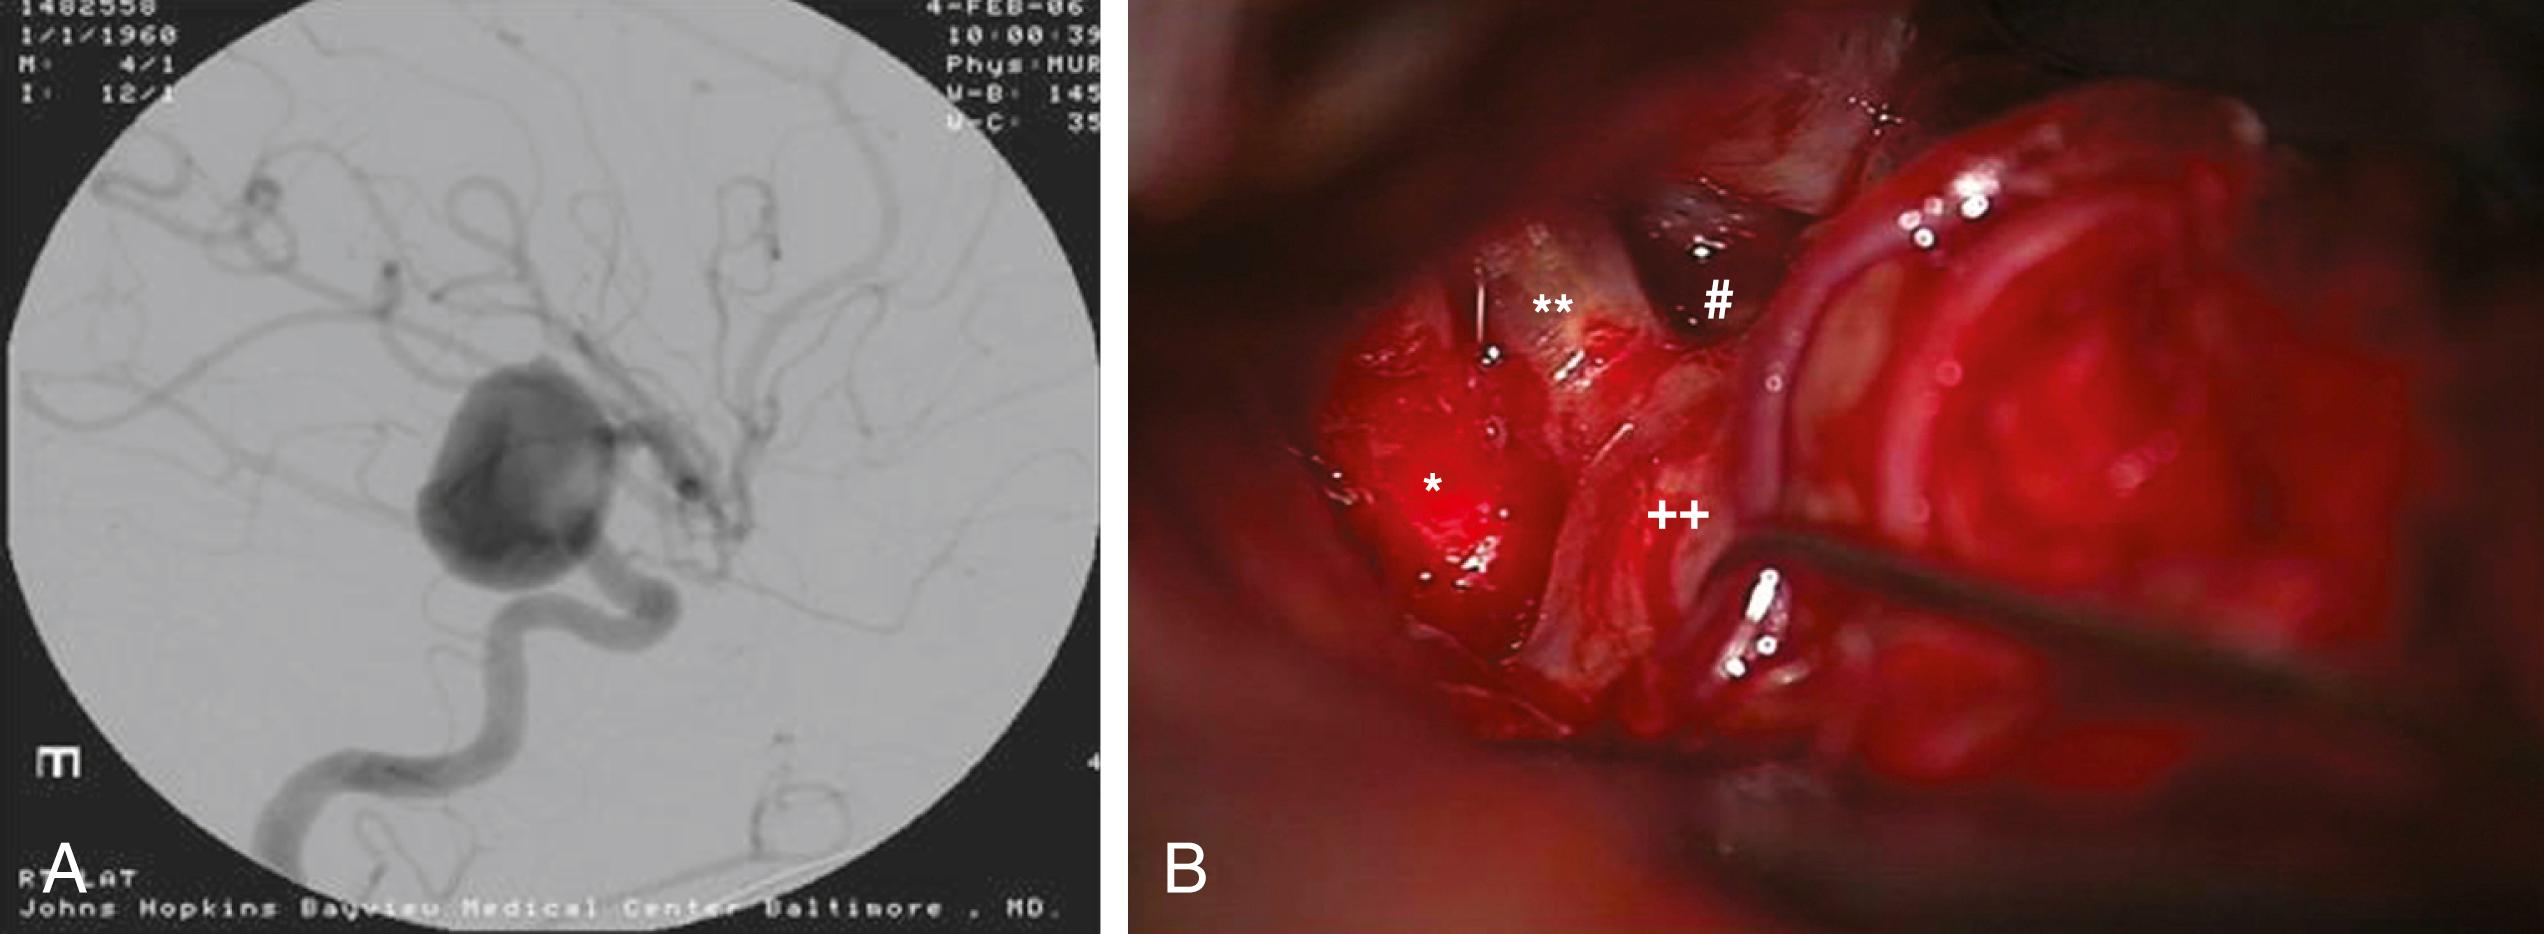 FIGURE 47.5, (A) Lateral digital subtraction angiography of a right posterior communicating artery (PComA) aneurysm. (B) Intraoperative view showing the optic nerve (∗), supraclinoid internal carotid artery (∗∗), PComA (#), and neck of the laterally projecting aneurysm (++).